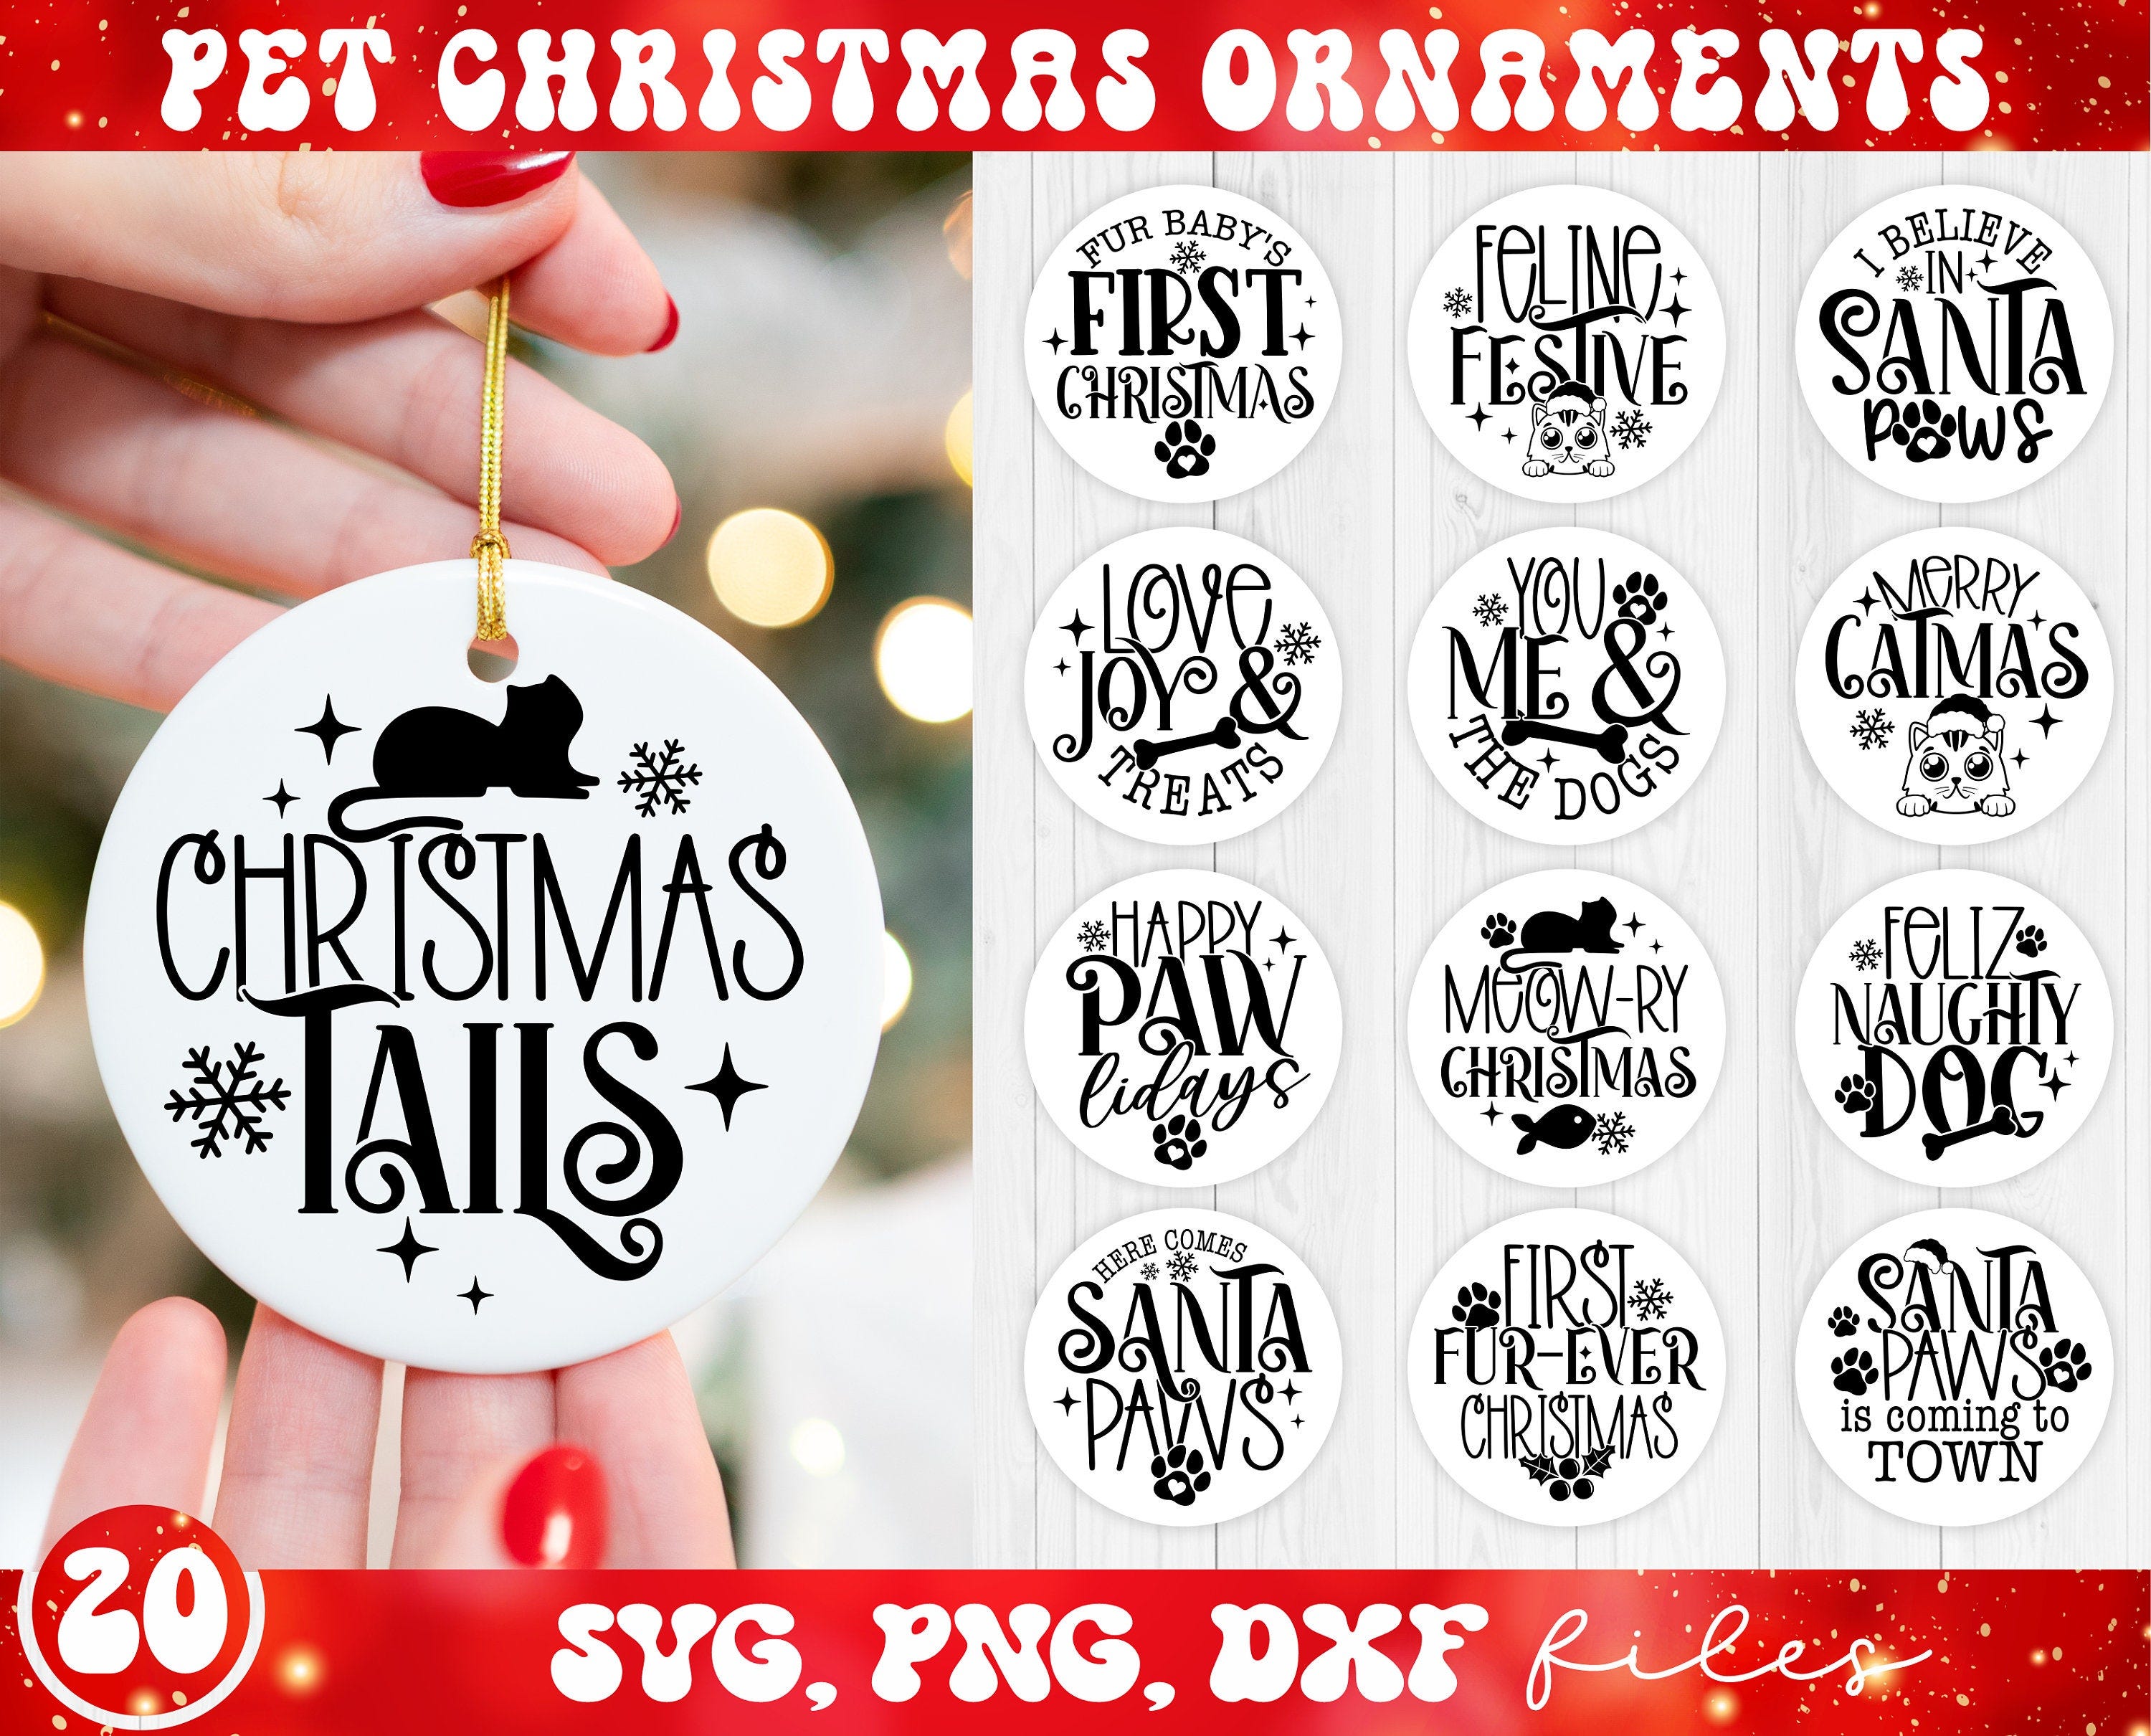 Pet Christmas Ornament SVG Bundle, Cat and Dog Christmas Ornaments svg, Merry Catmas svg, Santa Paws Is Coming To Town svg